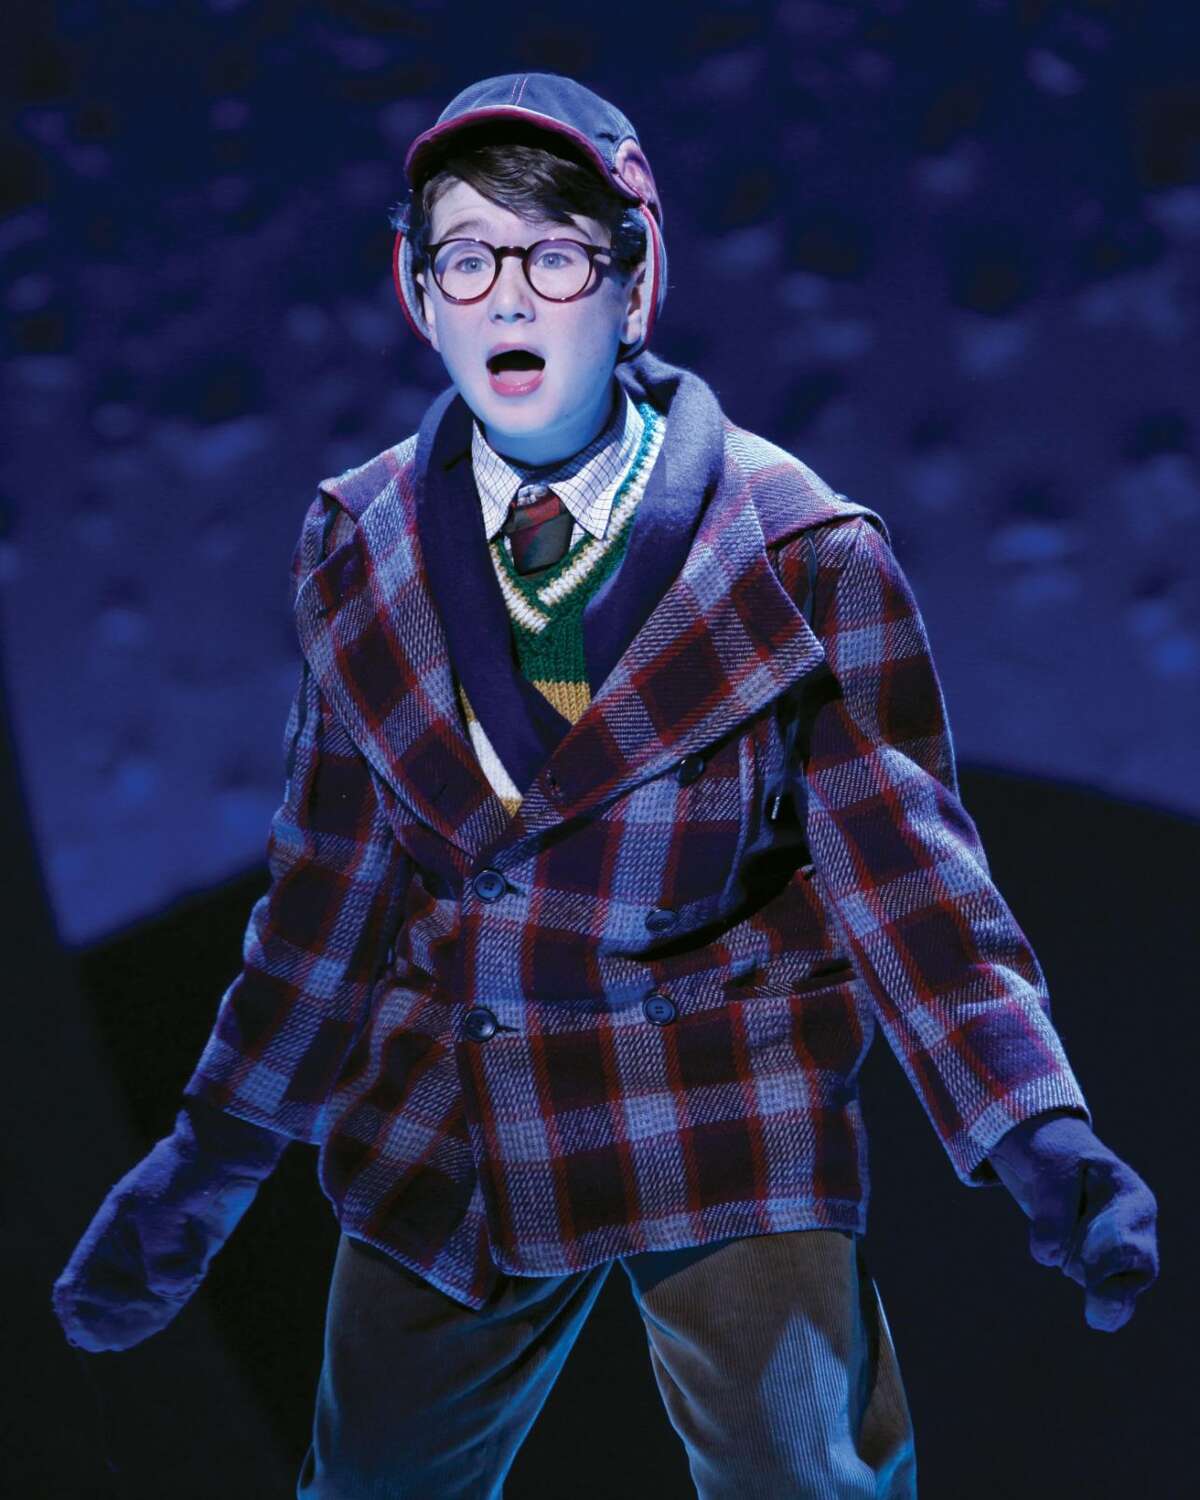 In this November 8 file photo released by Keith Sherman & Associates, actor Clarke Hallum portrays Ralphie in a scene from "A Christmas Story, The Musical." Producers are looking for actors, singers and dancers who stand no more than 4-foot-11 to fill the shoes of Ralphie and his friends as they prepare a musical version of the classic film "A Christmas Story" for Broadway. Performances begin Nov. 6 in New York with an opening night set for Nov. 19. (AP Photo/Keith Sherman & Associates, Carol Rosegg, File)